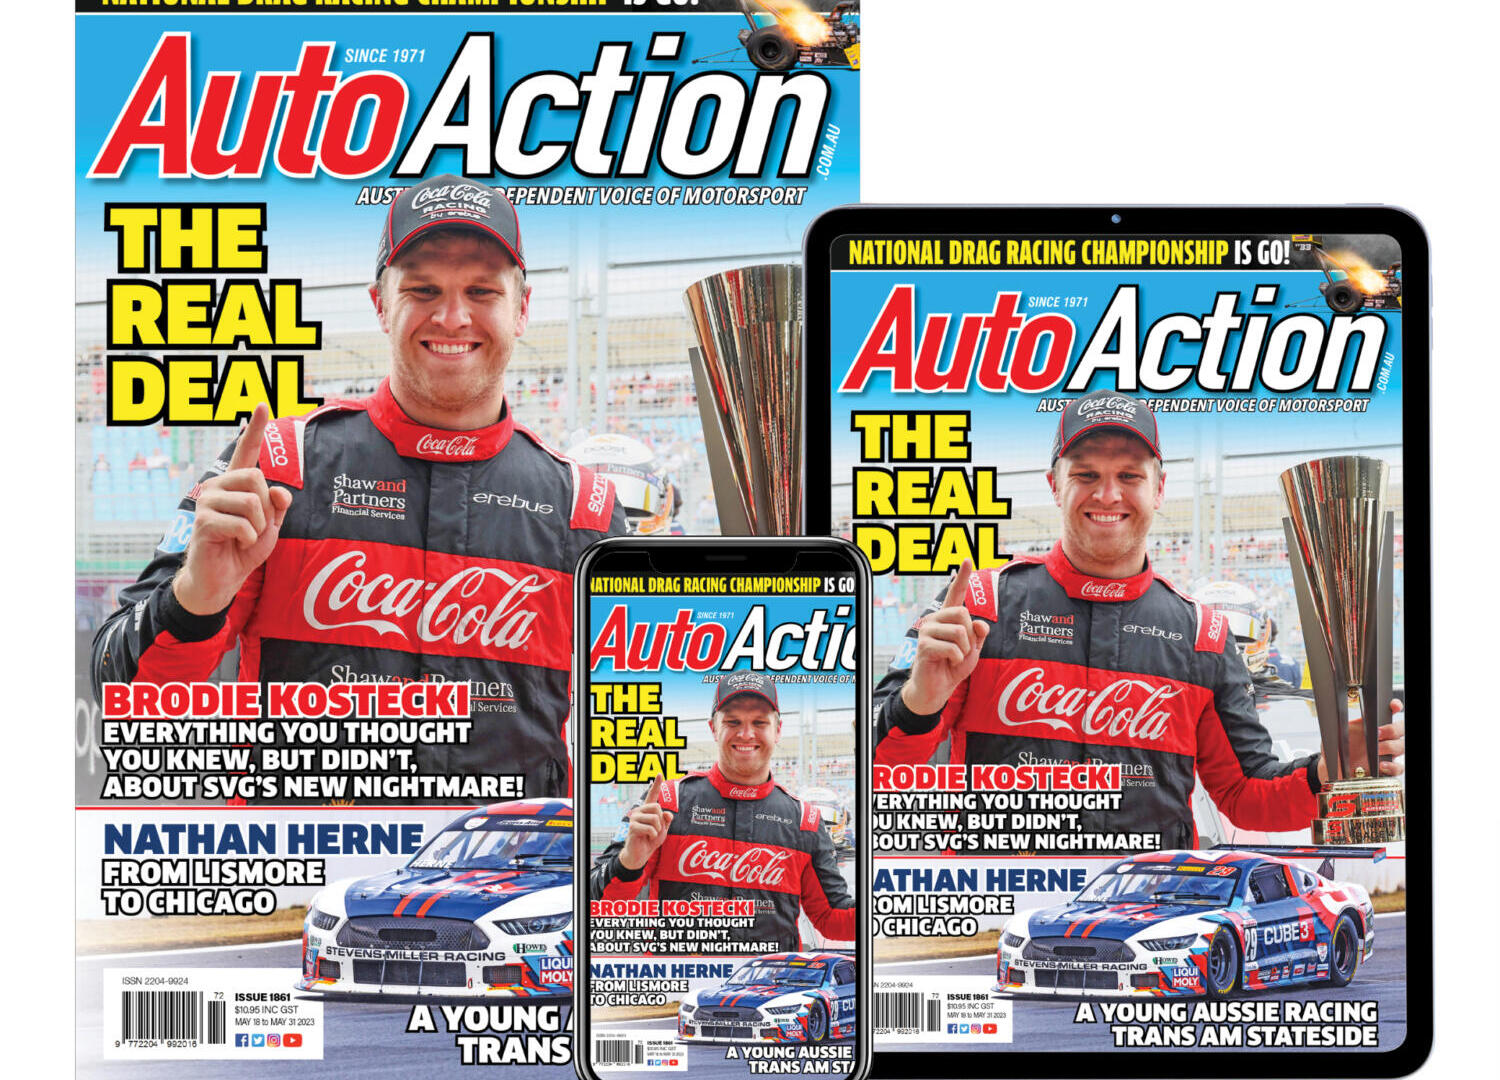 Auto Action magazine covers latest issue